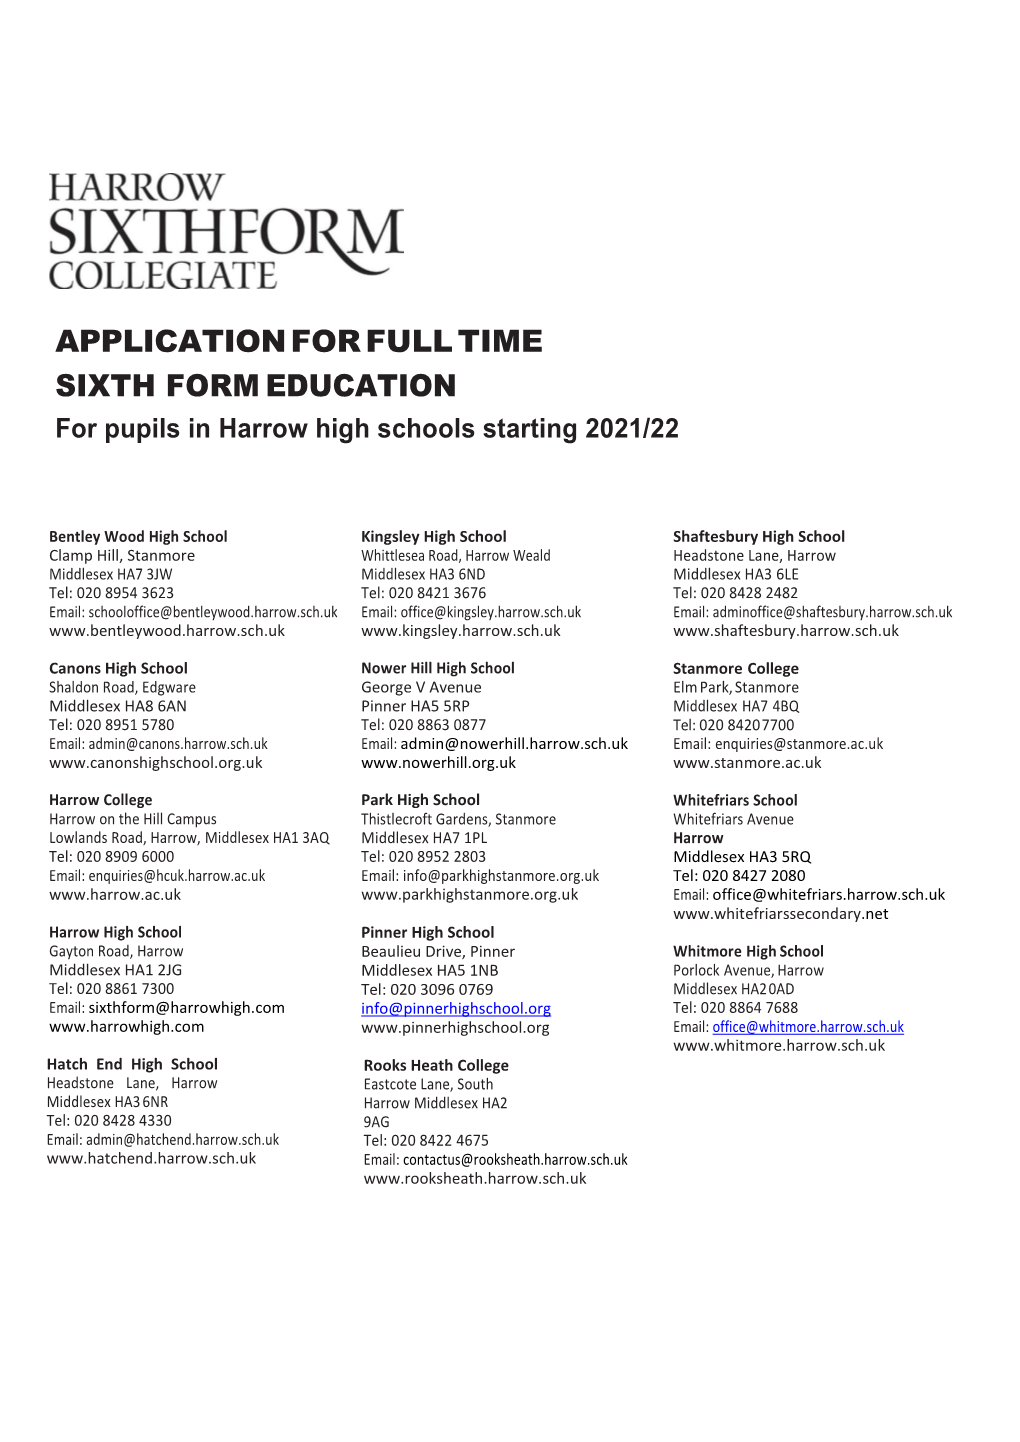 APPLICATION for FULL TIME SIXTH FORM EDUCATION for Pupils in Harrow High Schools Starting 2021/22